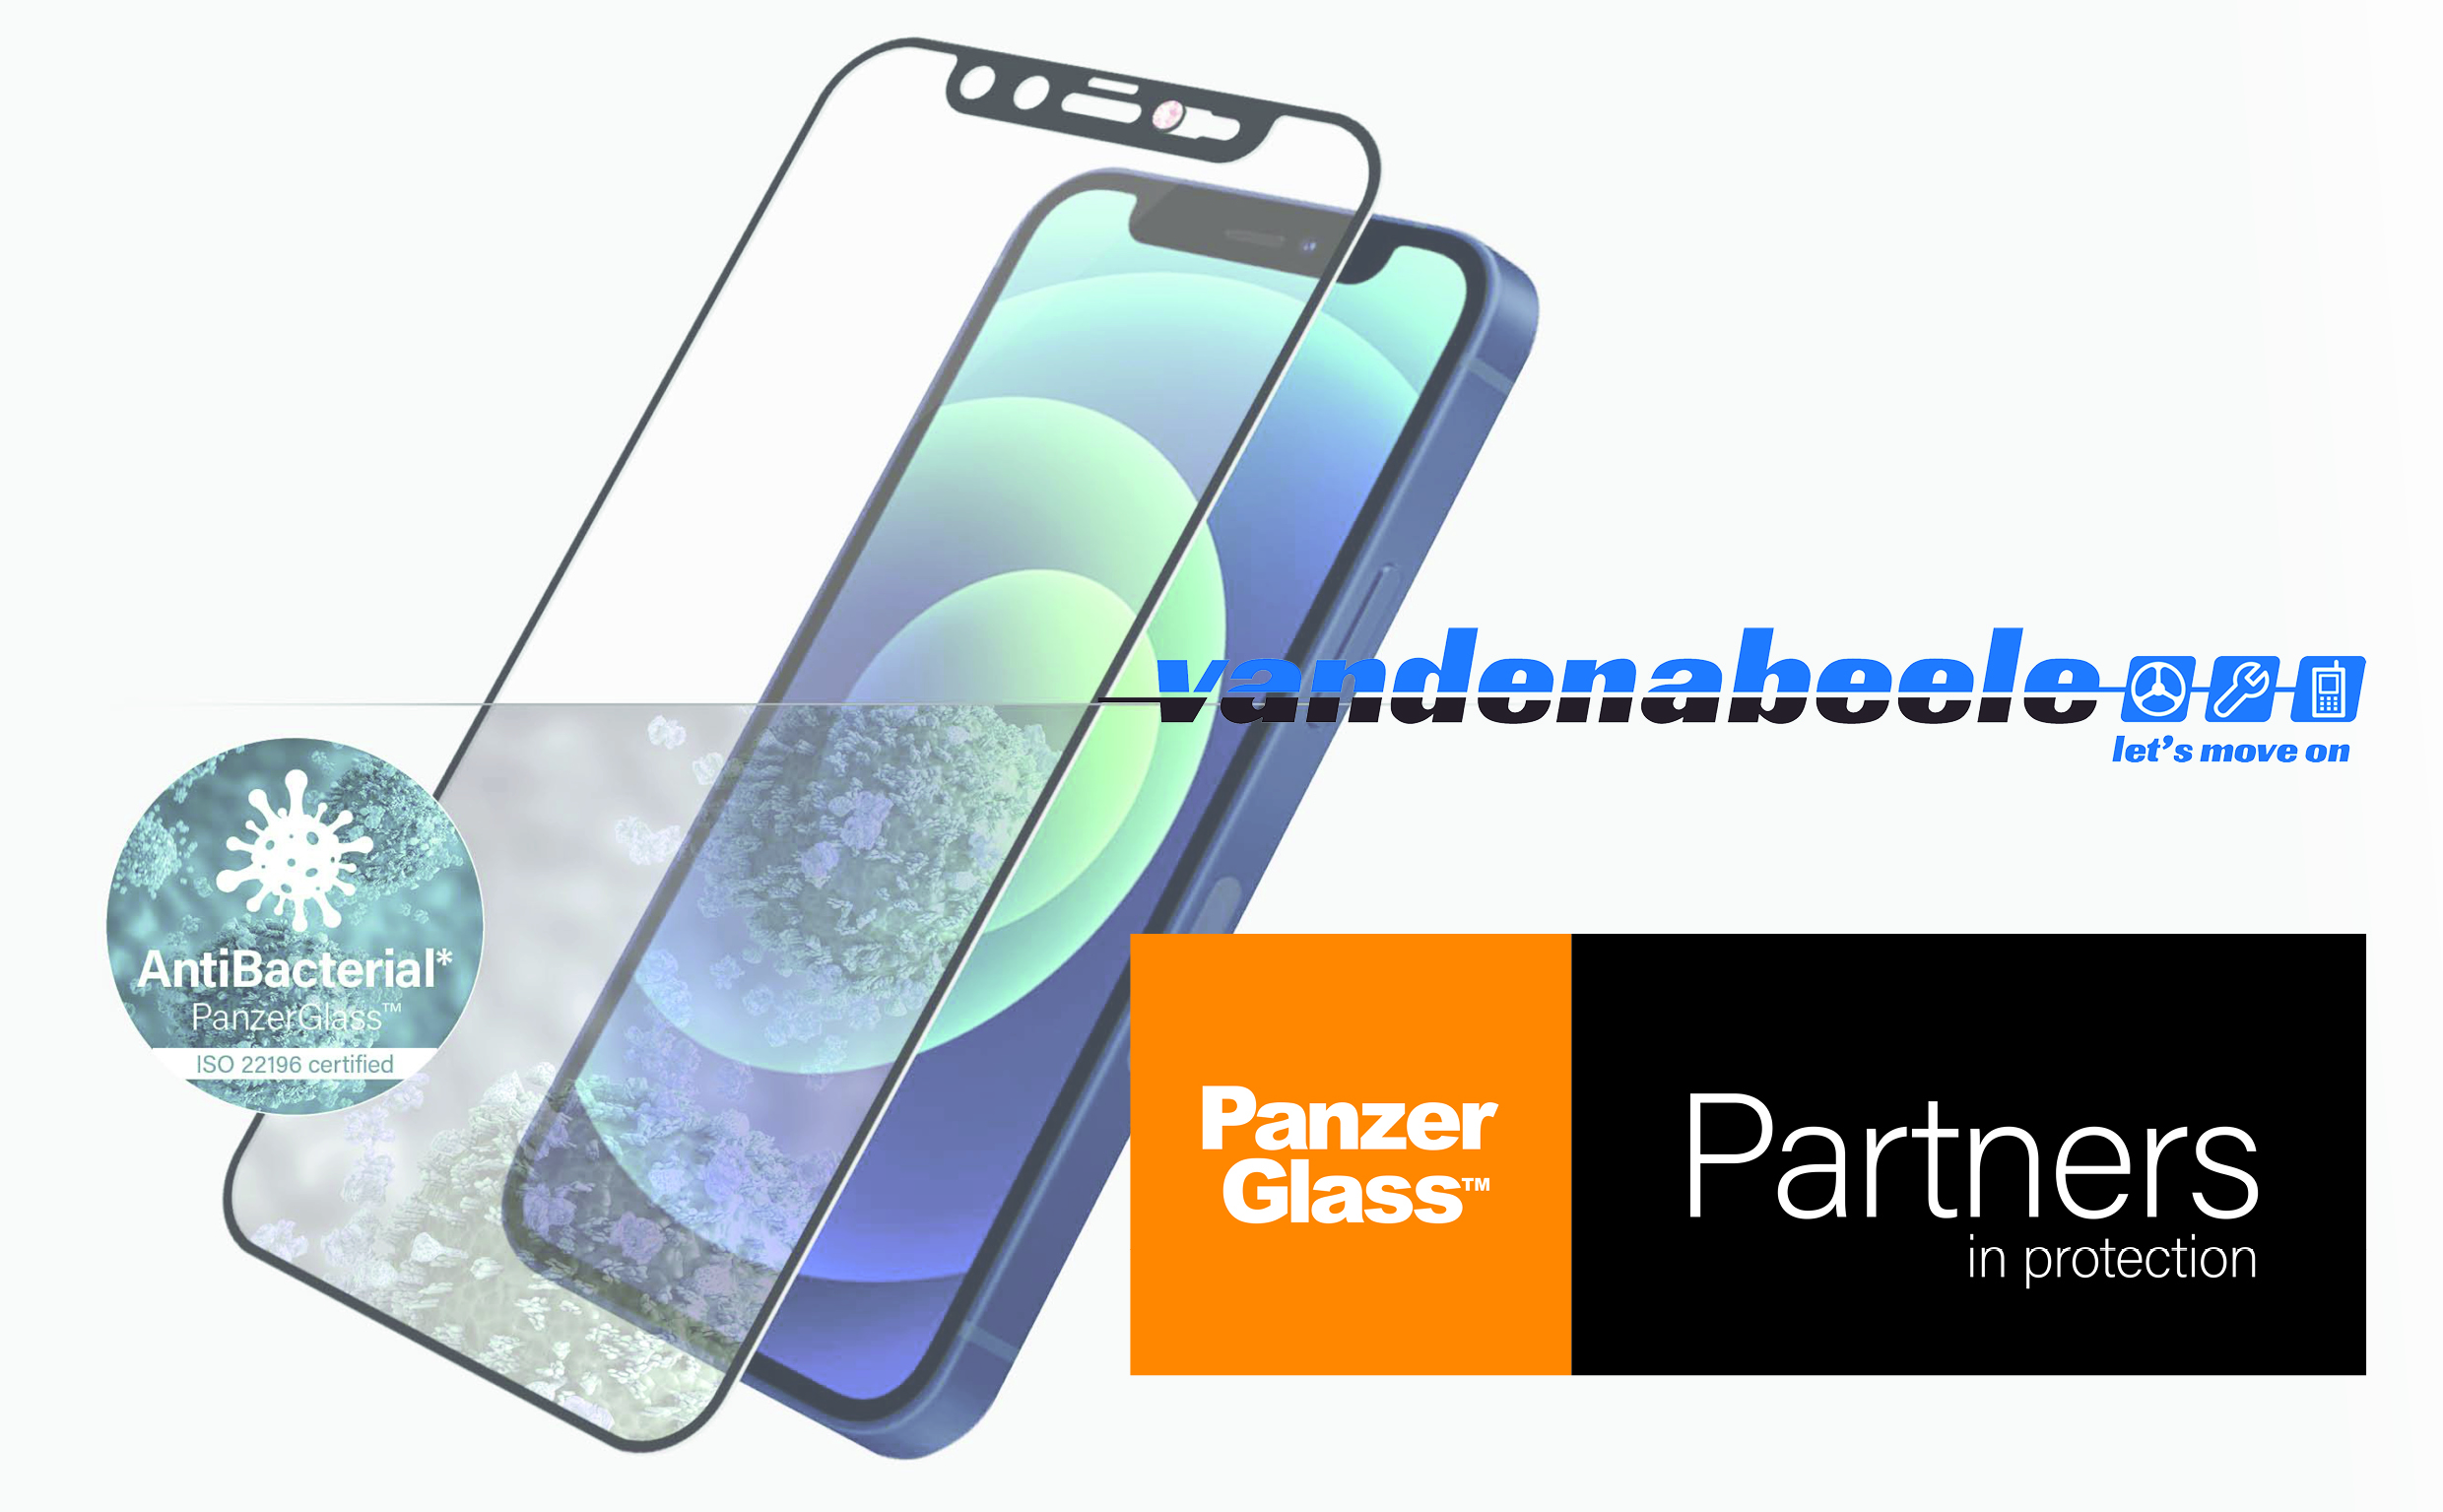 PanzerGlass Partner in Protection